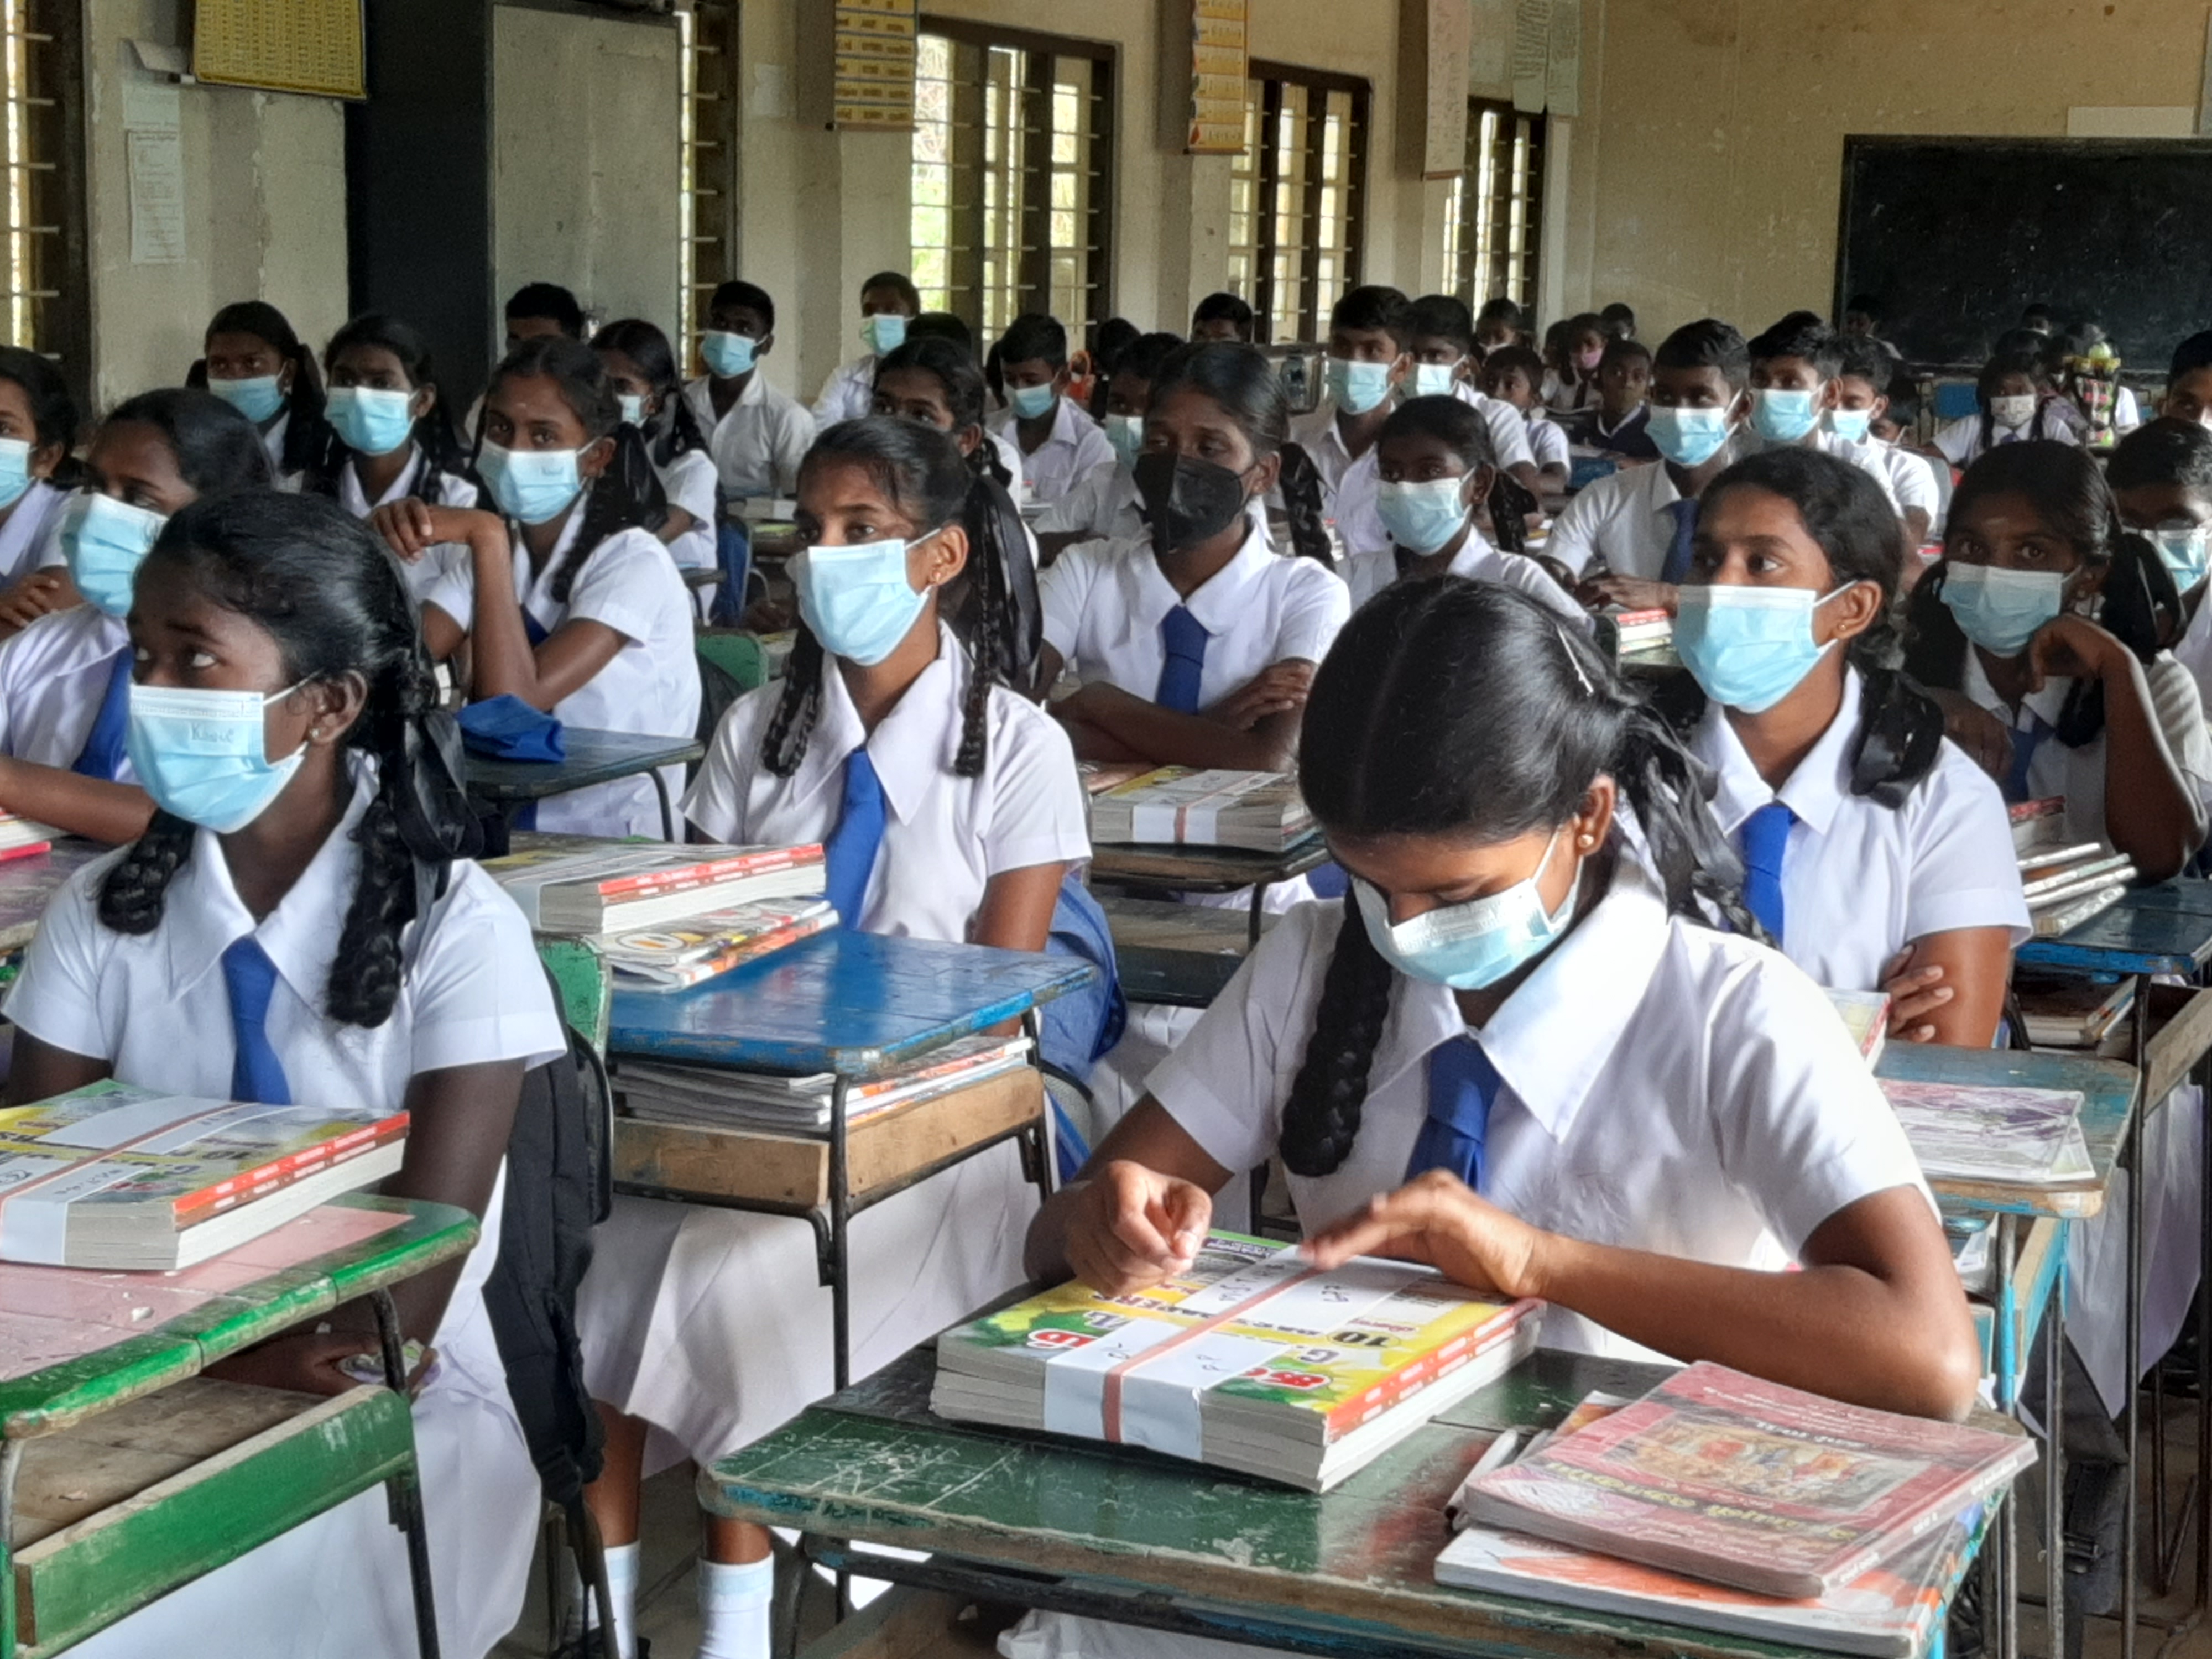 Reviving Education – A-PAD in partnership with the Government of Sri Lanka reach out to over 10,500 children facing e-learning difficulties.